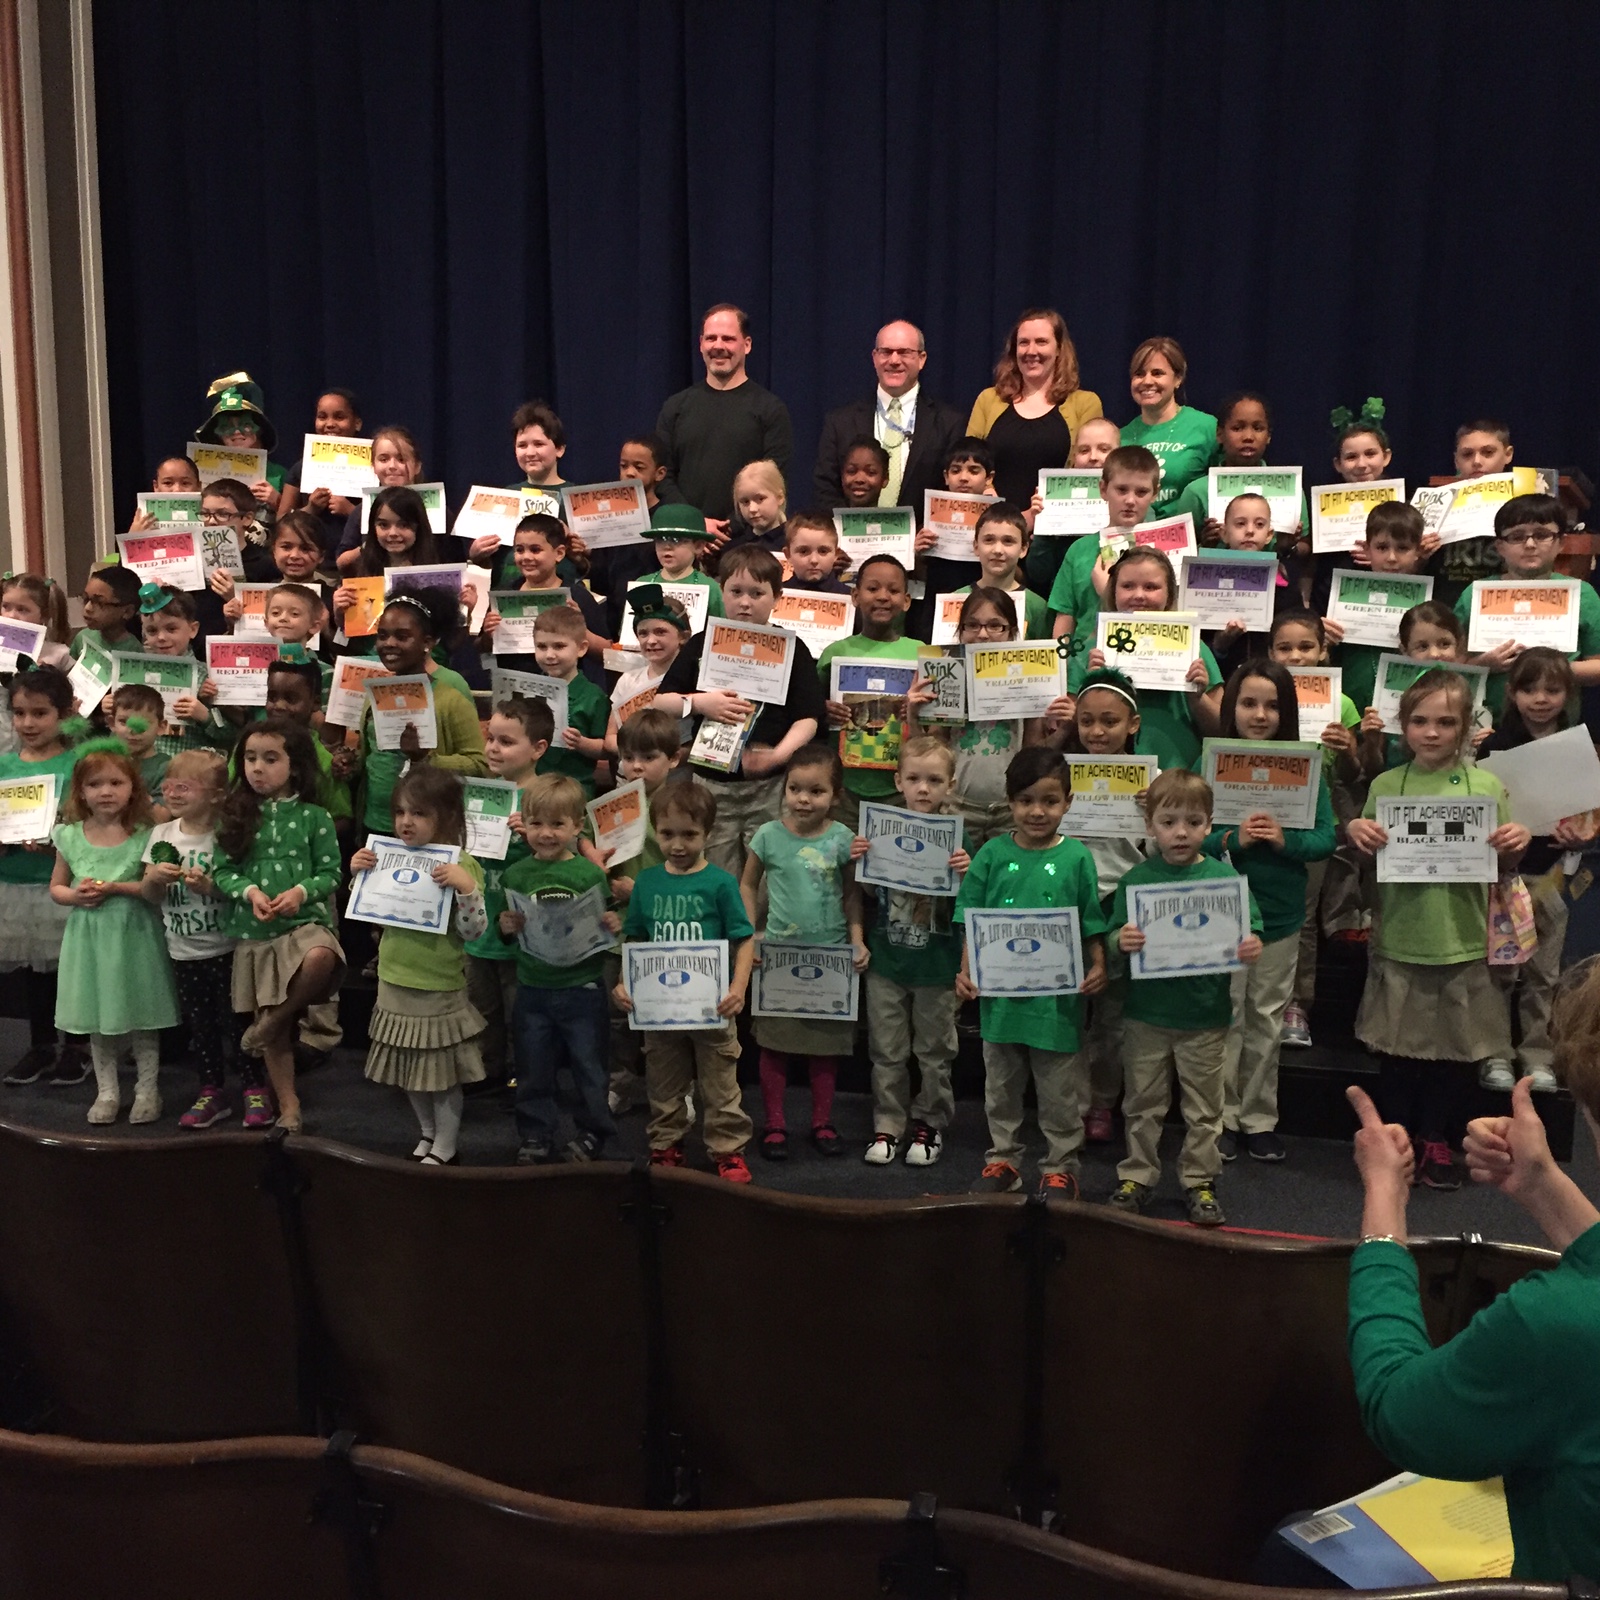 Lit Fit participants at Lorraine Elementary receive reading awards